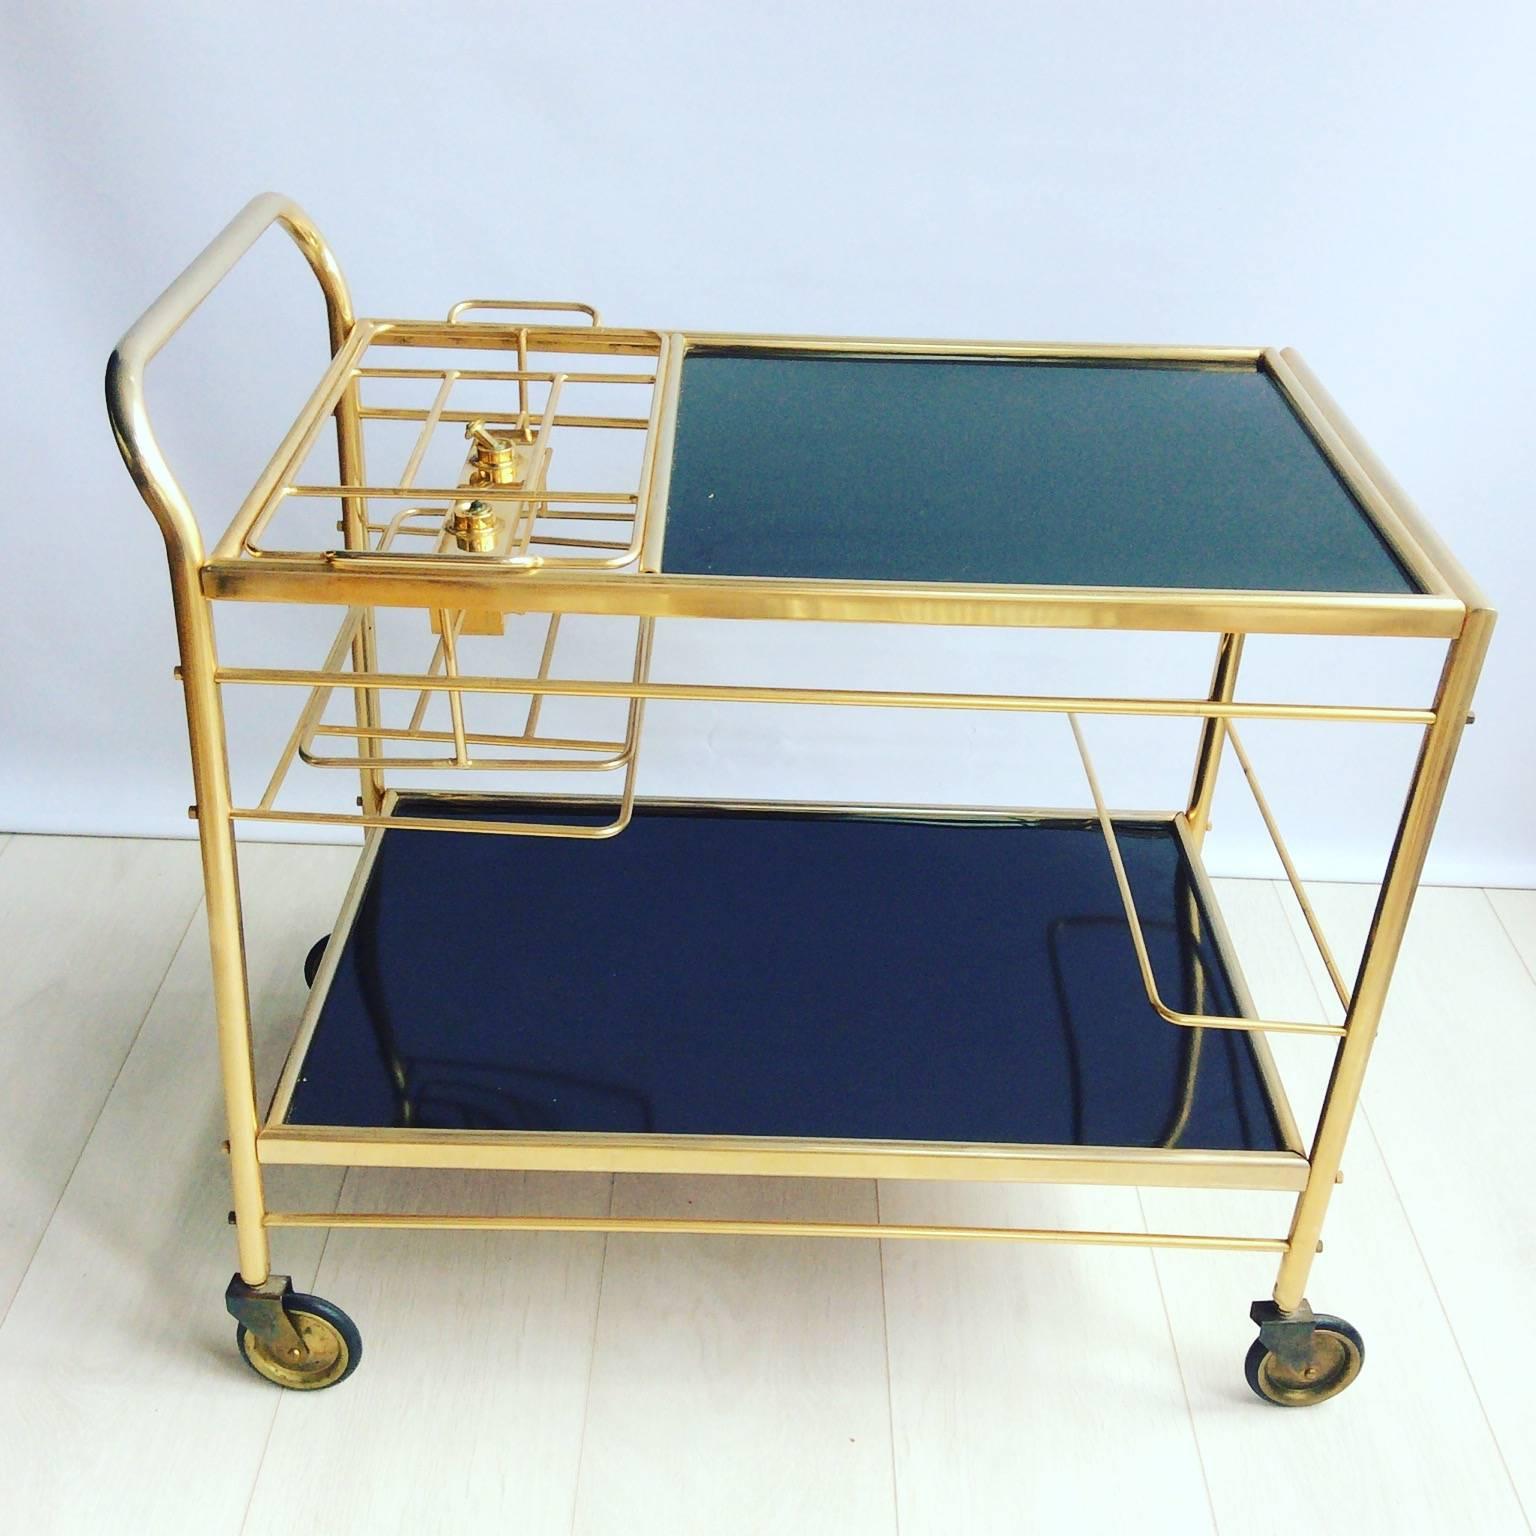 One of a kind. This amazing drinks trolley with a burner (should you require!)

Great condition.

Top tray measures 64cm by 40.5cm and stands 57.5cm tall.